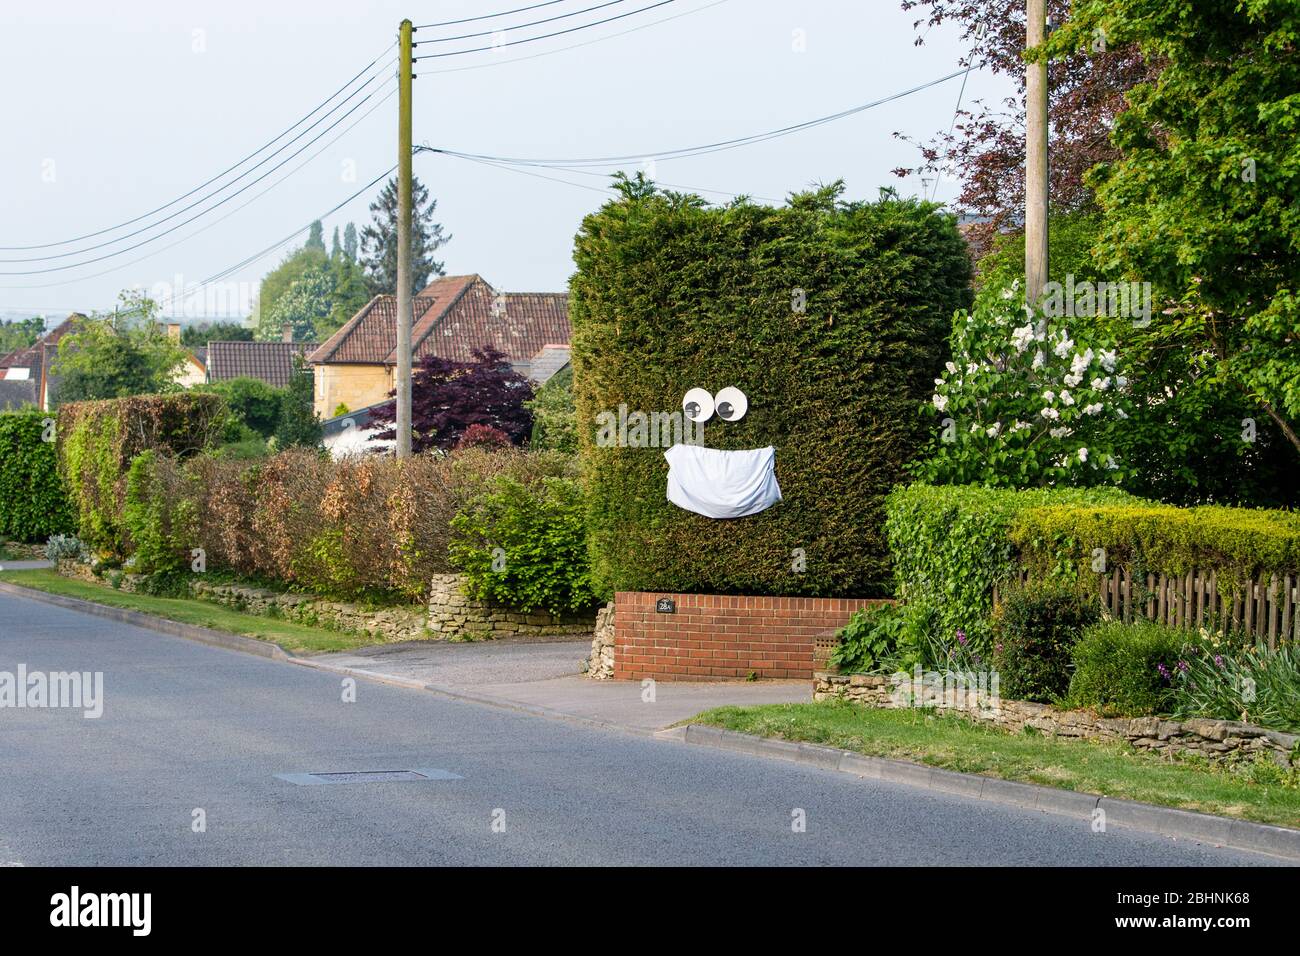 Chippenham, Wiltshire UK, 27th April, 2020. As scientific advisers in the UK discuss whether the public should wear face masks in public a large face mask that has been hung on a hedge is pictured in Chippeneham, Wiltshire.  Credit: Lynchpics/Alamy Live News Stock Photo